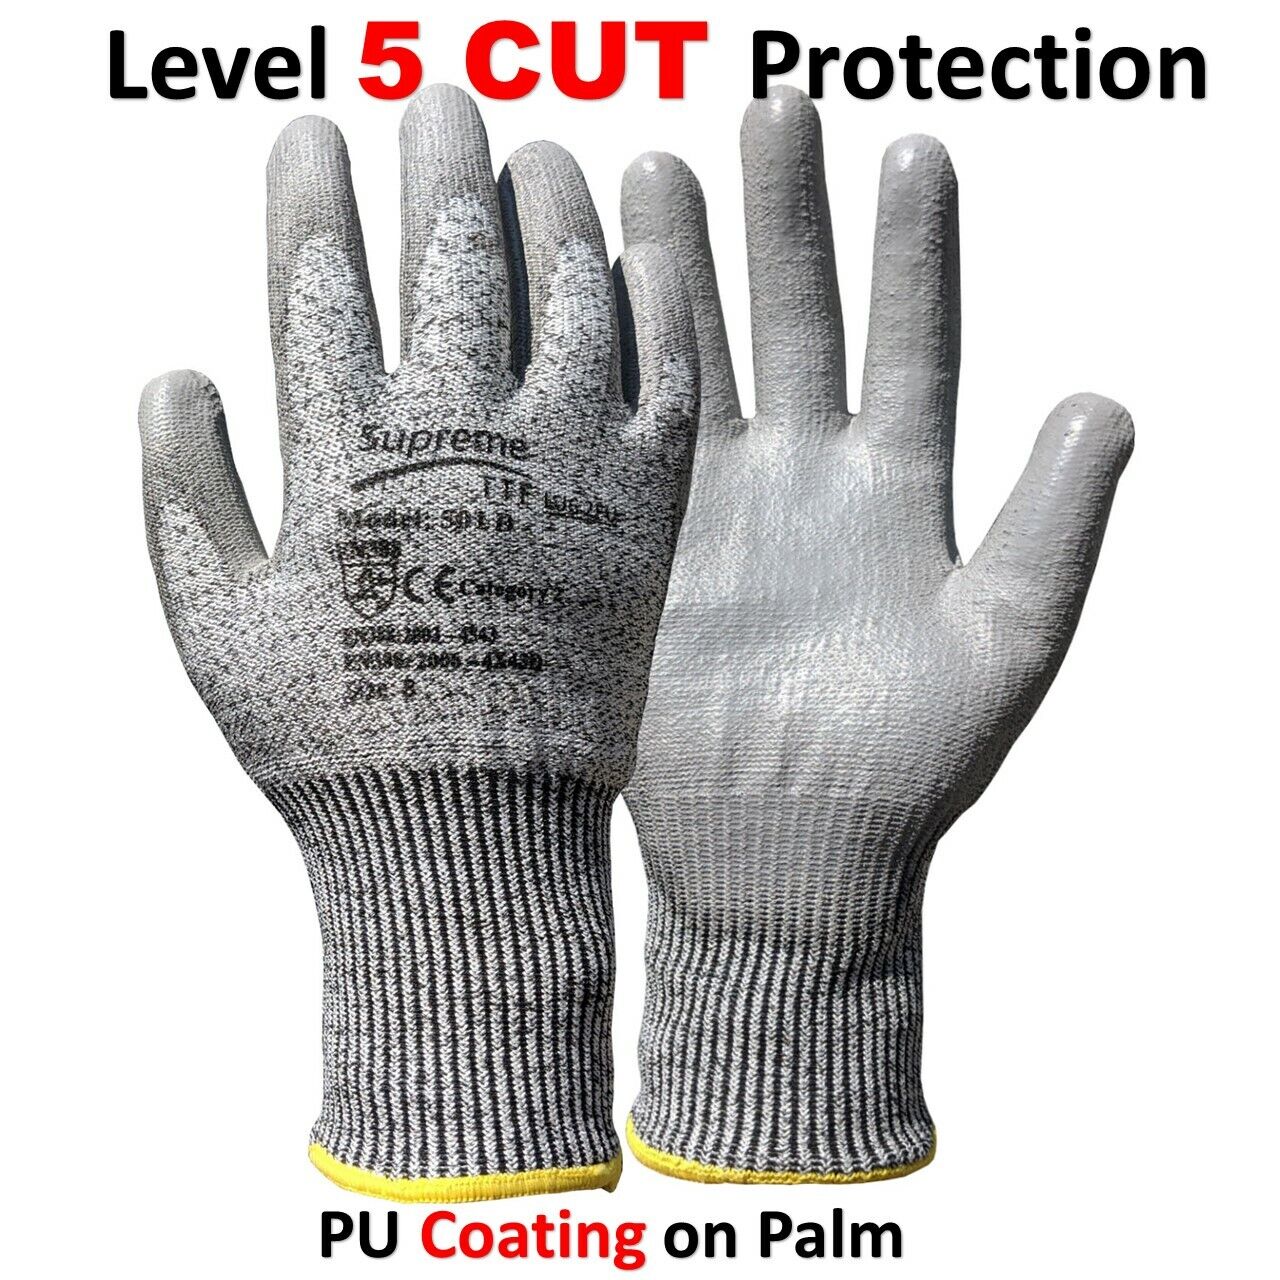 PU ANTI CUT RESISTANT WORK SAFETY GLOVES BUILDERS GRIP PROTECTION LEVEL 5